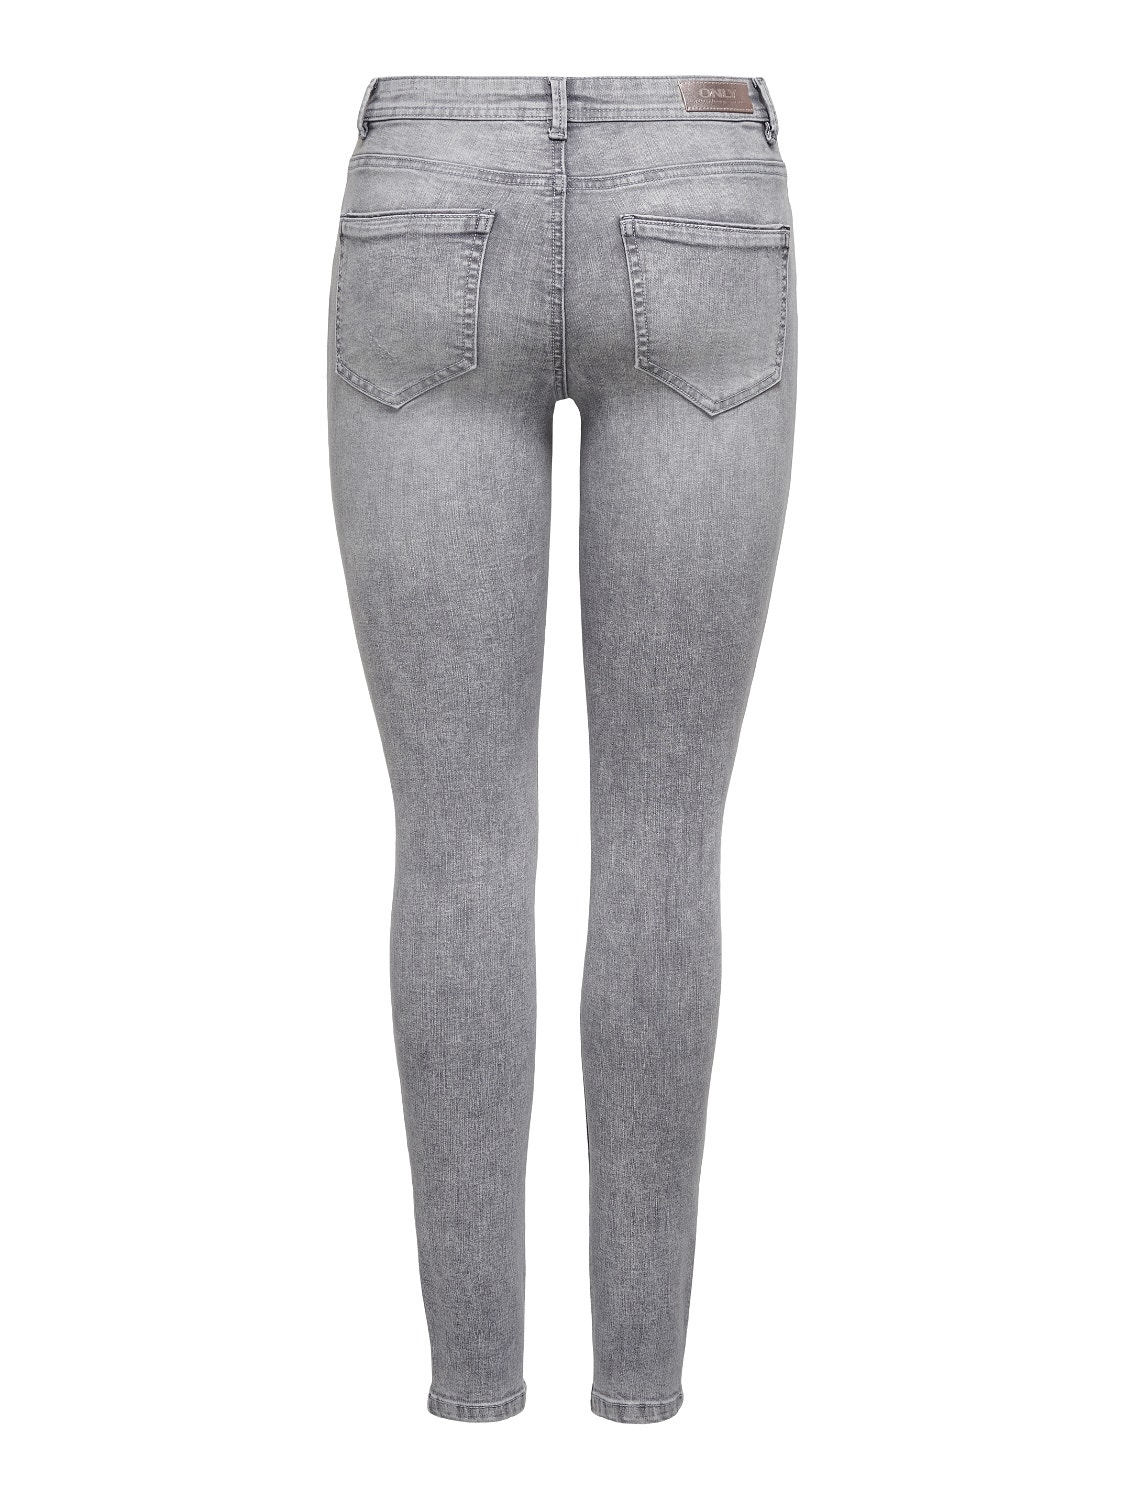 ONLY Jeans Skinny Fit Taille moyenne -Medium Grey Denim - 15223167